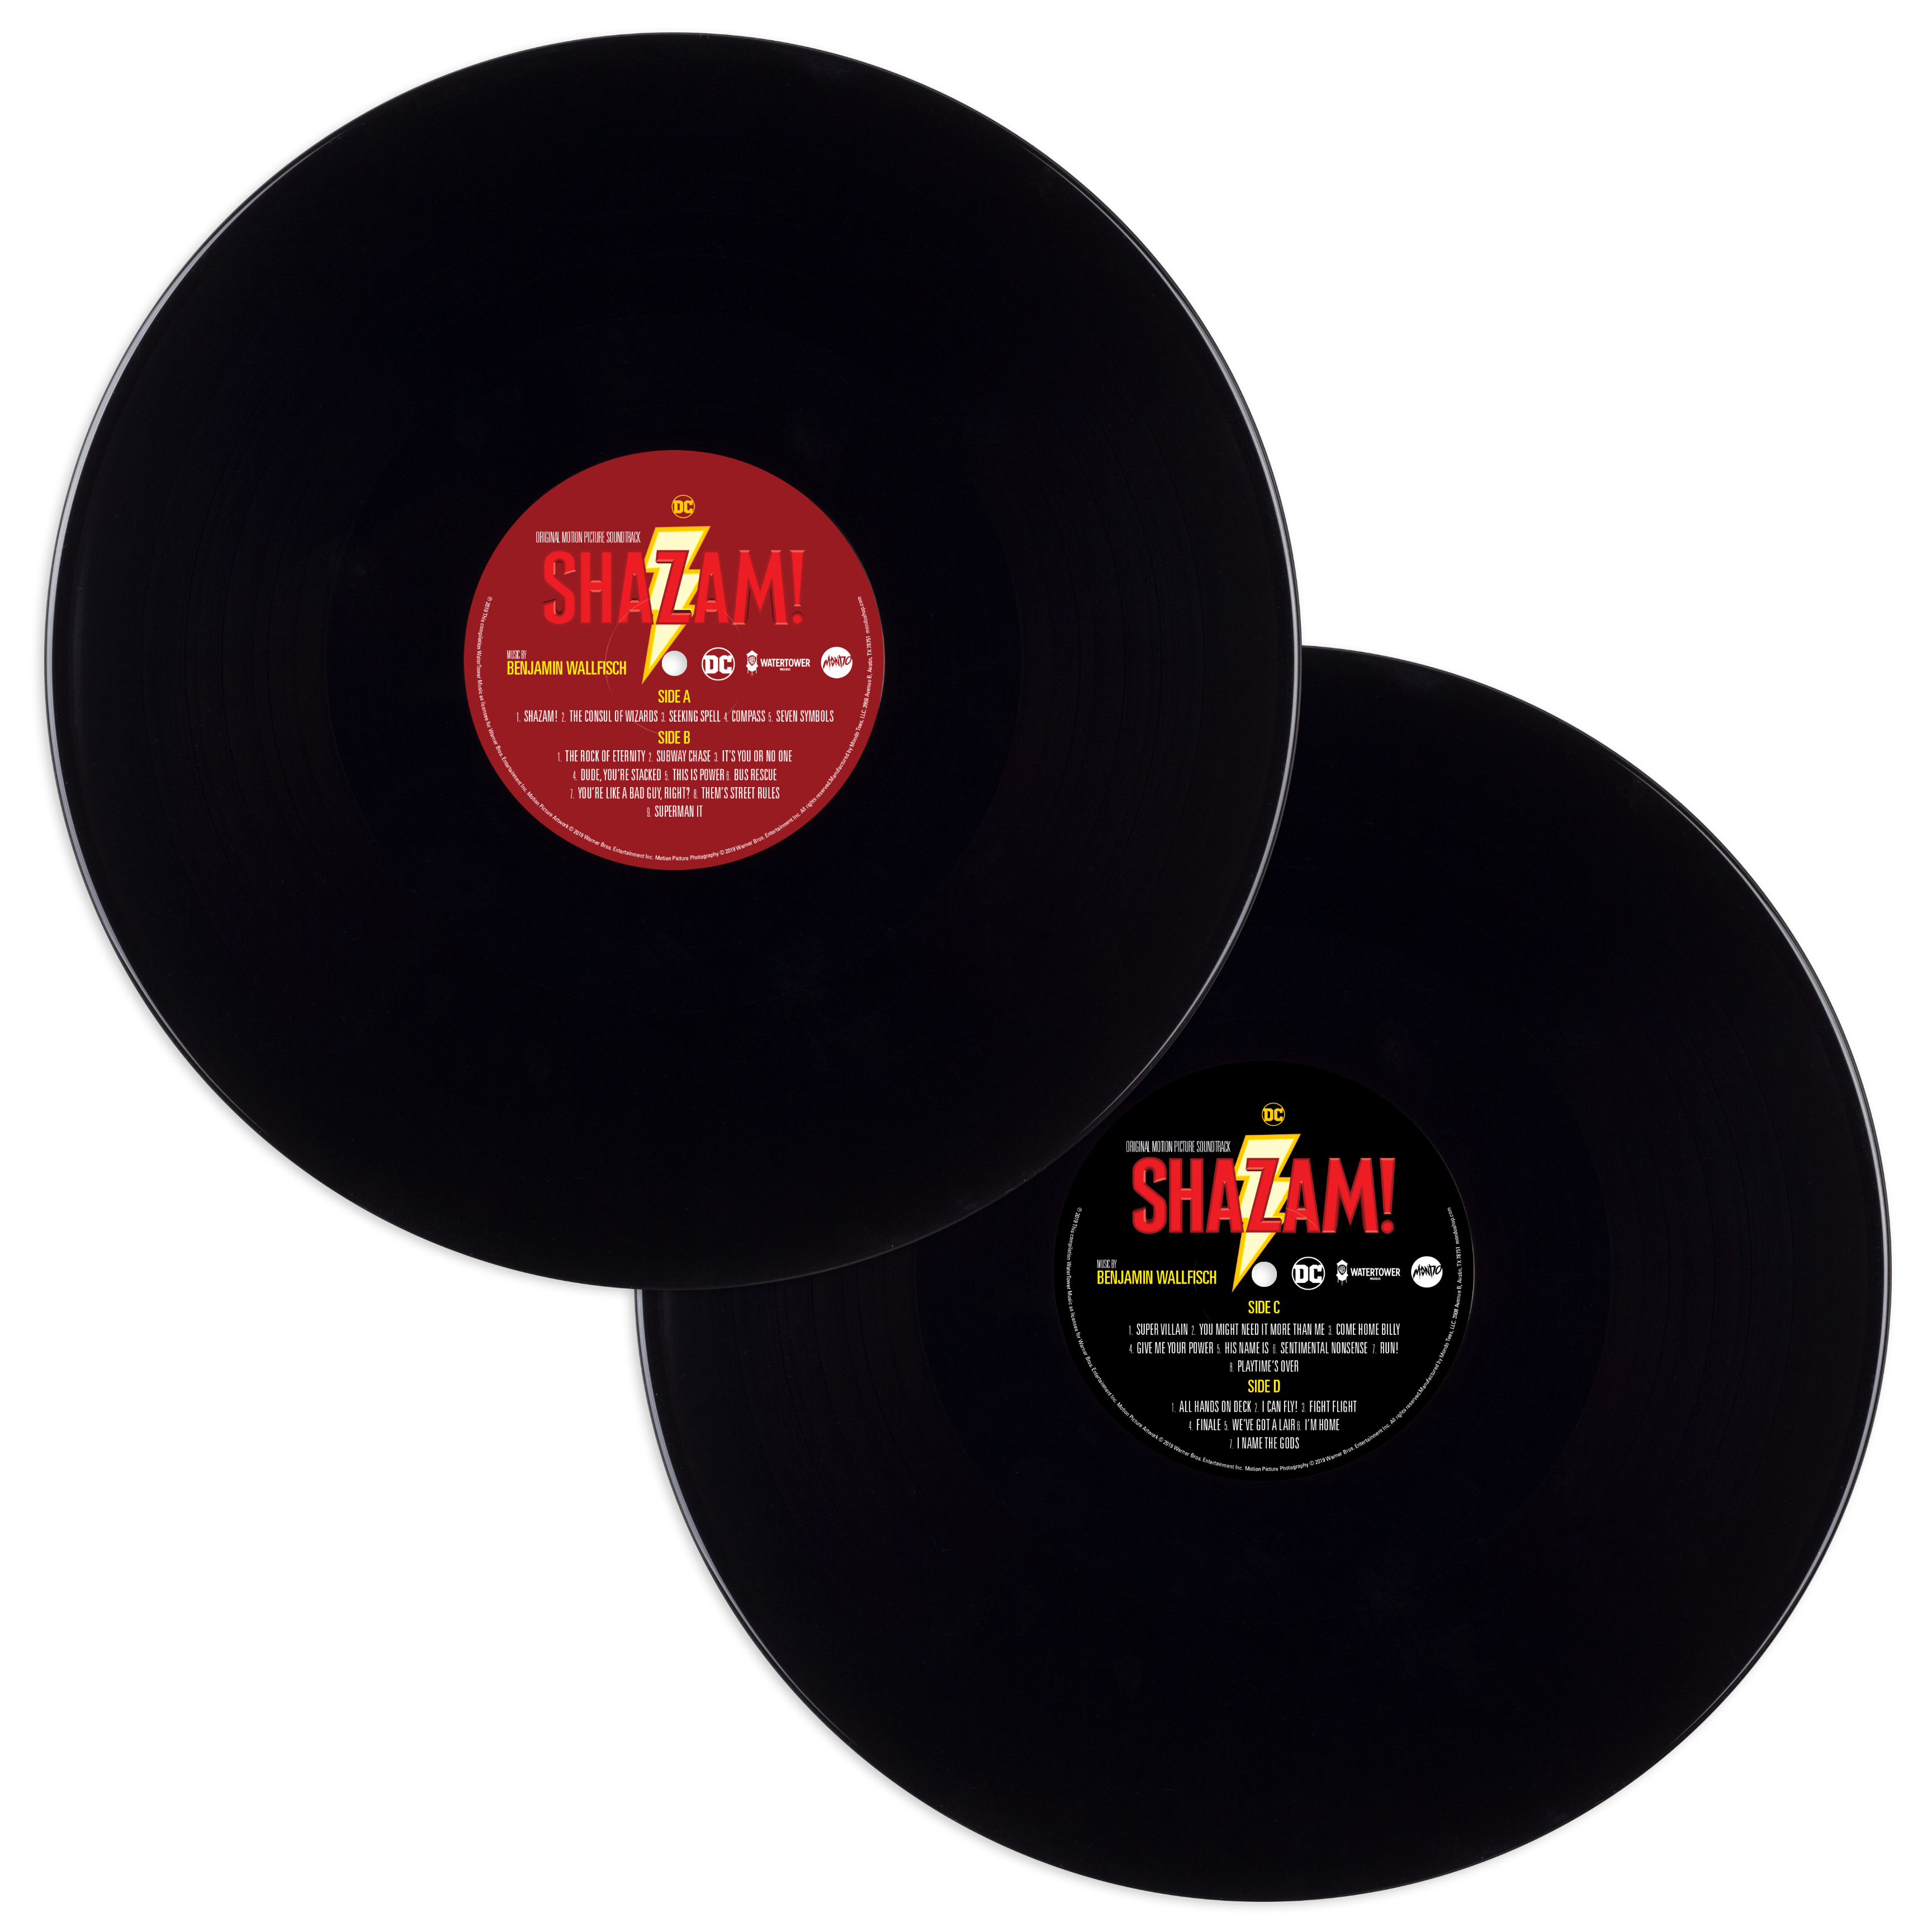 Various Artists-Soundtrack - The LEGO Batman Movie: Songs From The Motion  Picture Exclusive LP Color Vinyl